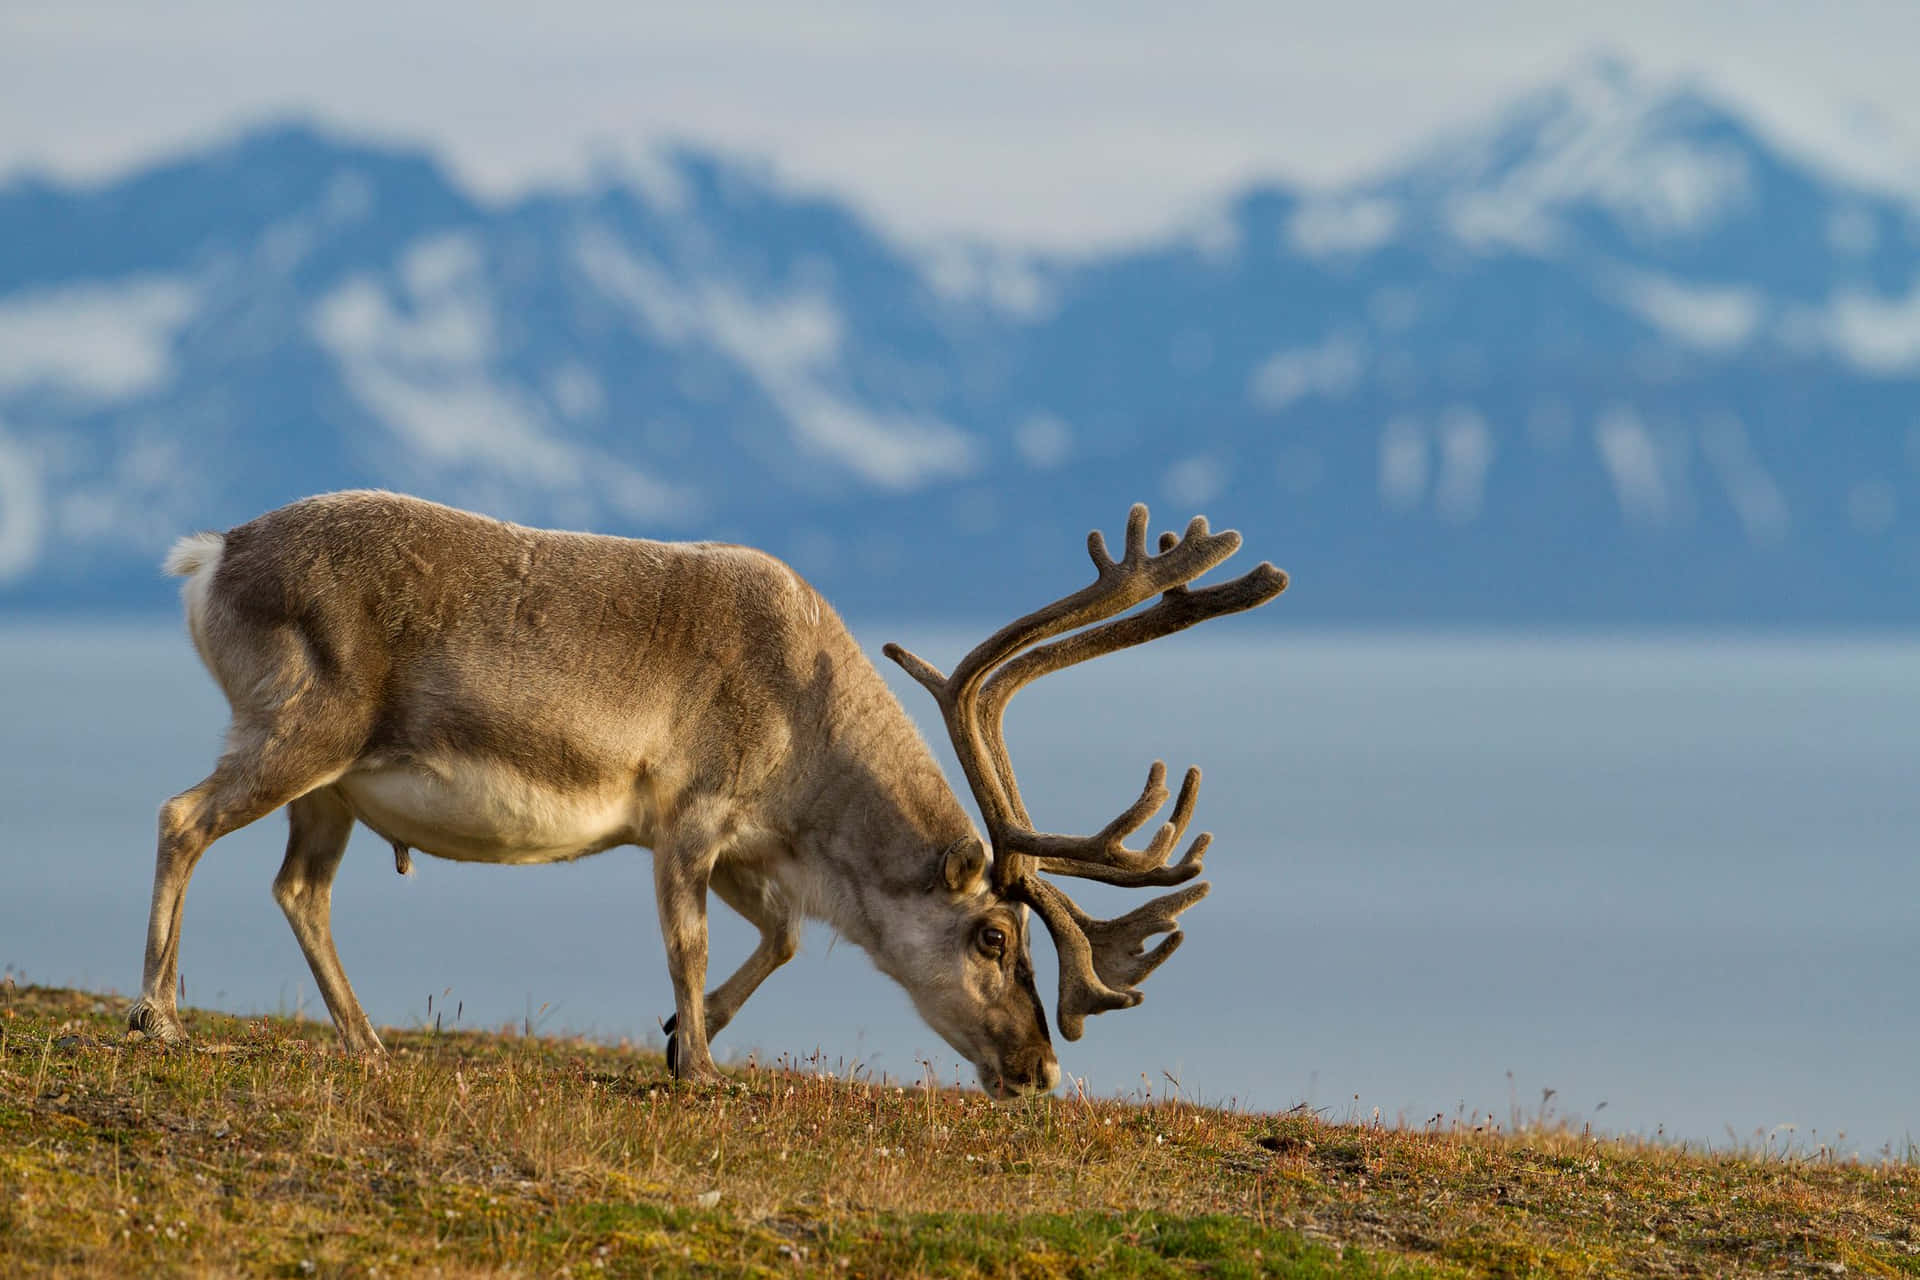 A herd of sleek and majestic reindeer roams through a picturesque snow-covered winterland.